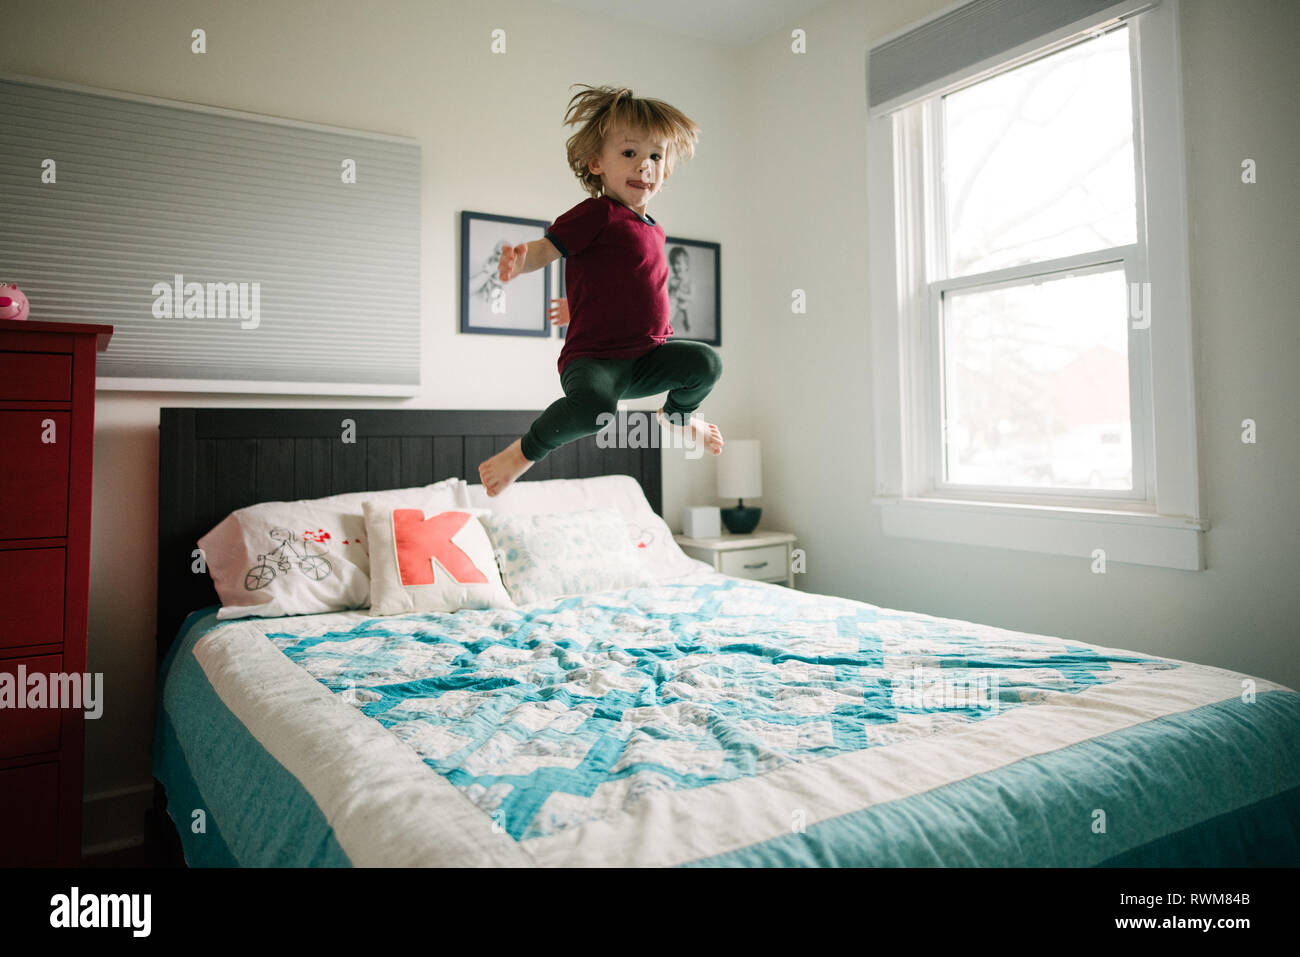 Boy jumping on bed Stock Photo